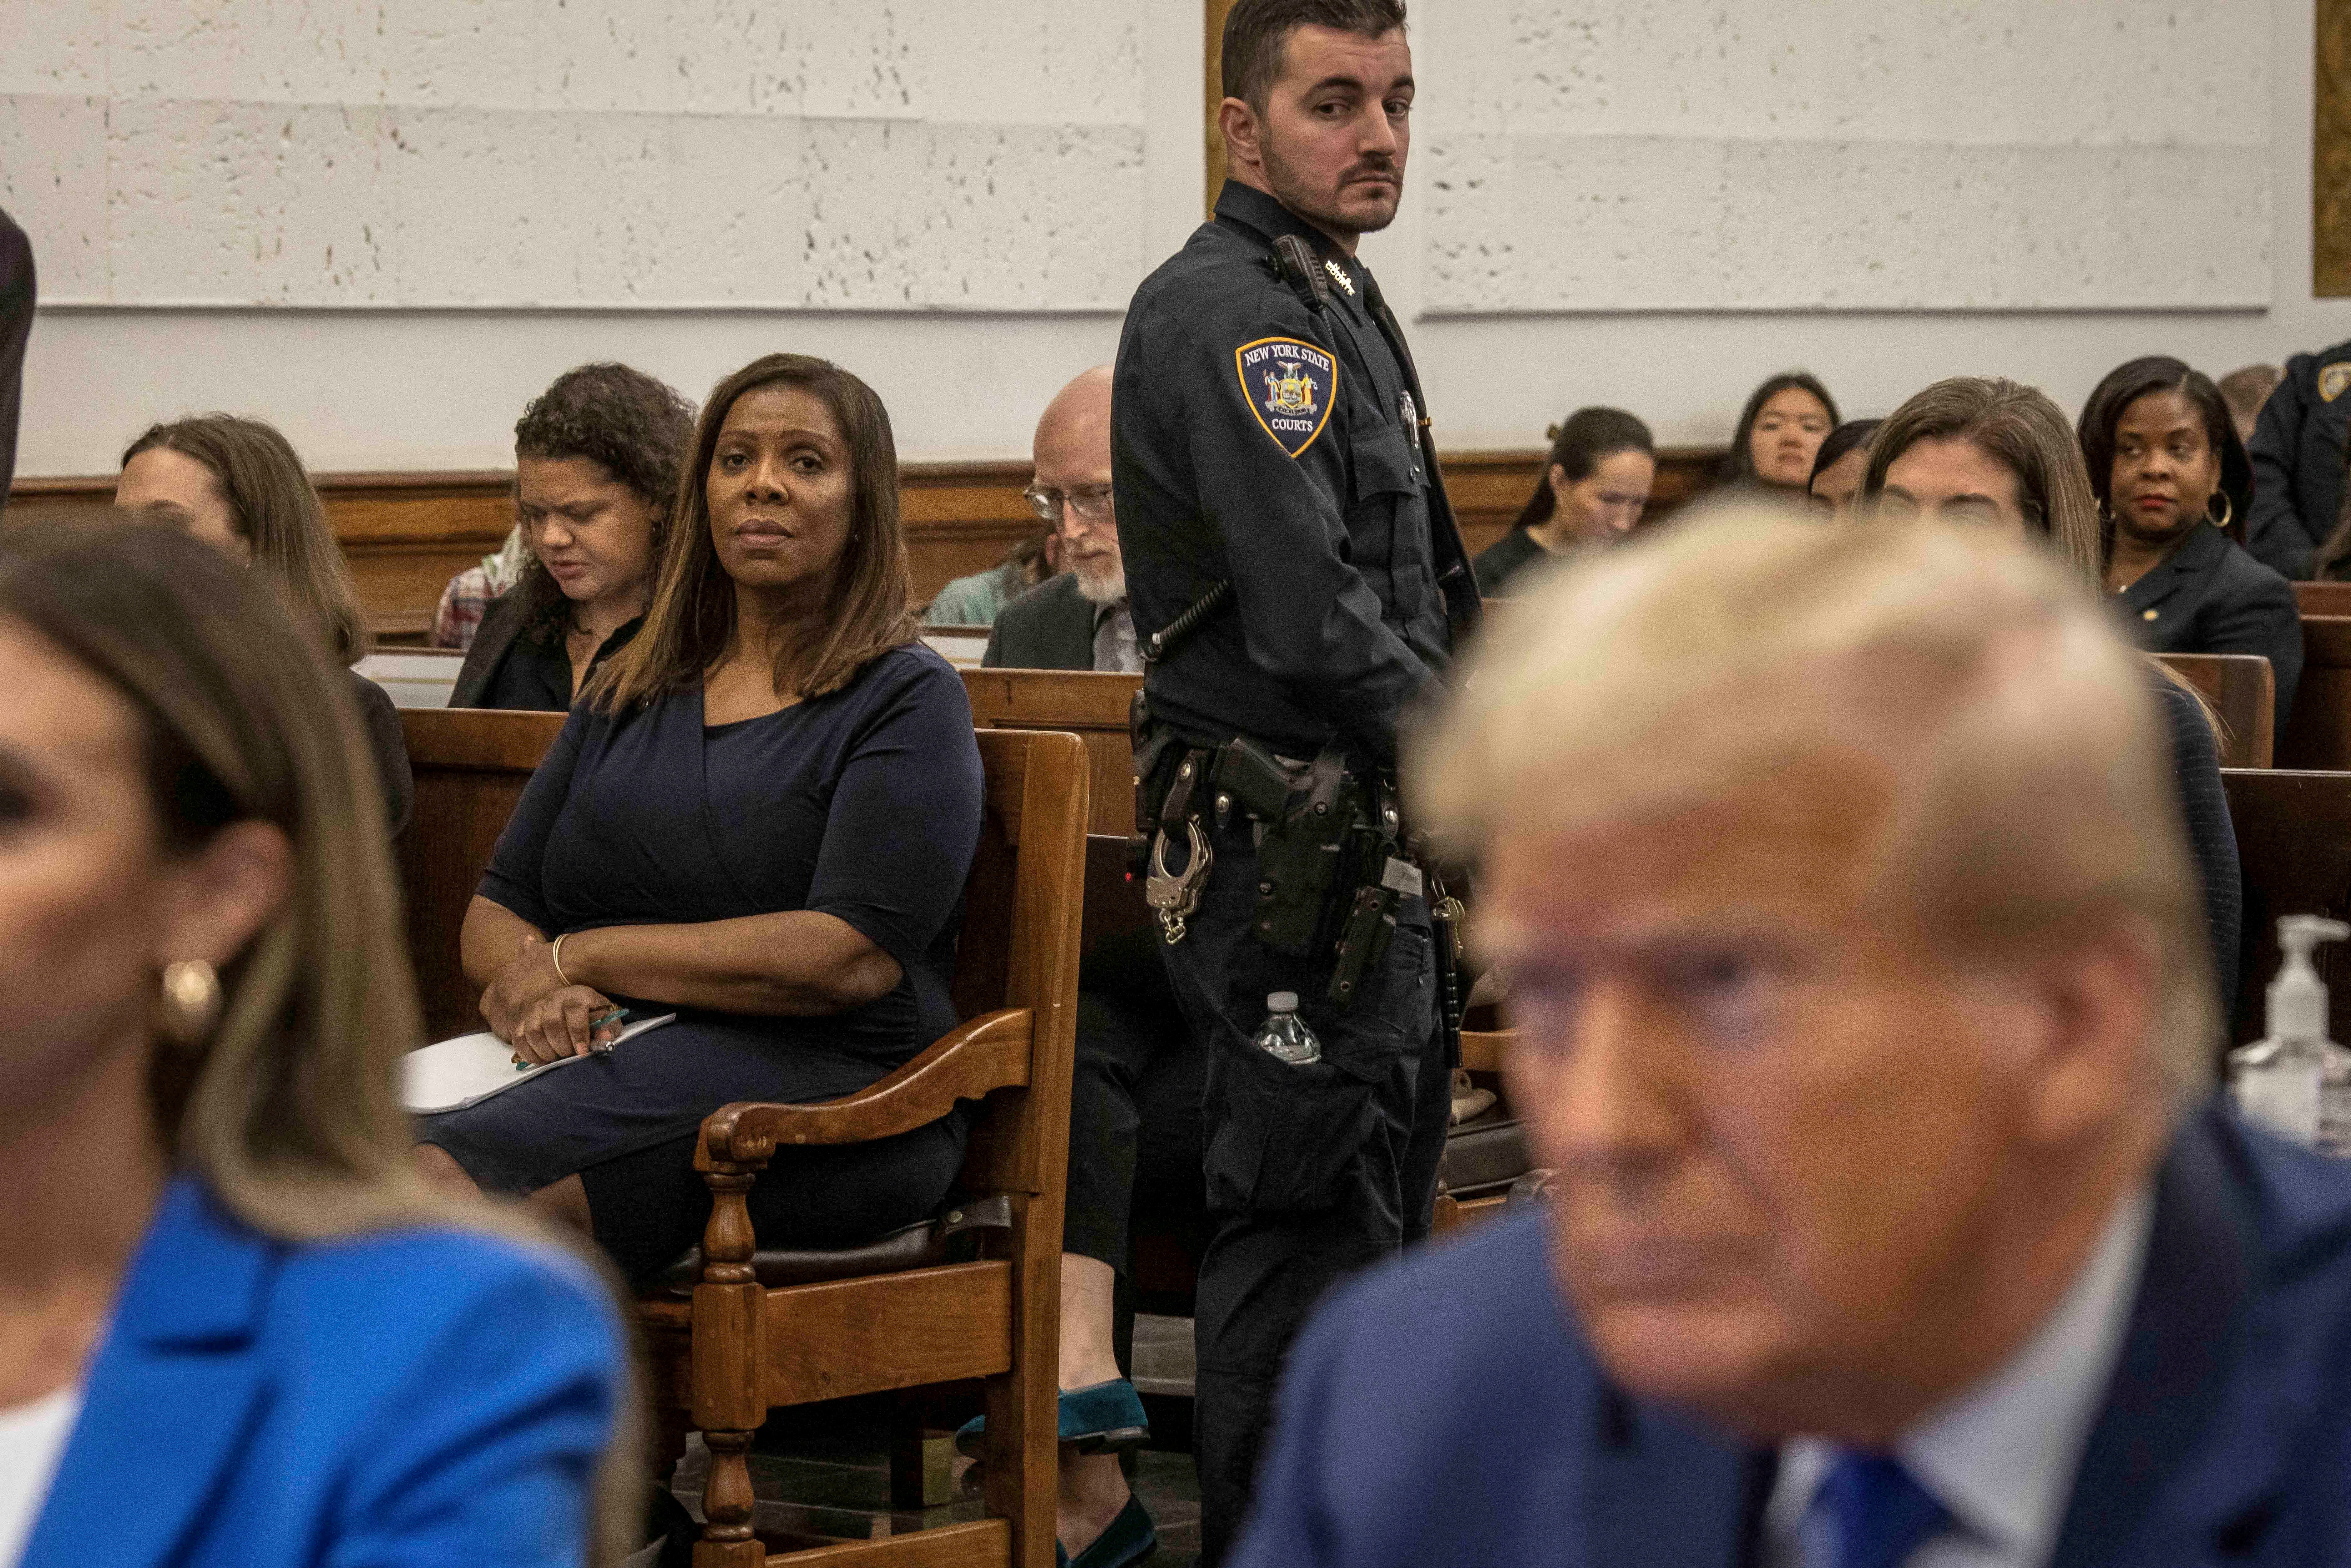 New York Attorney General Letitia James has sat in the courtroom through most of the proceedings.